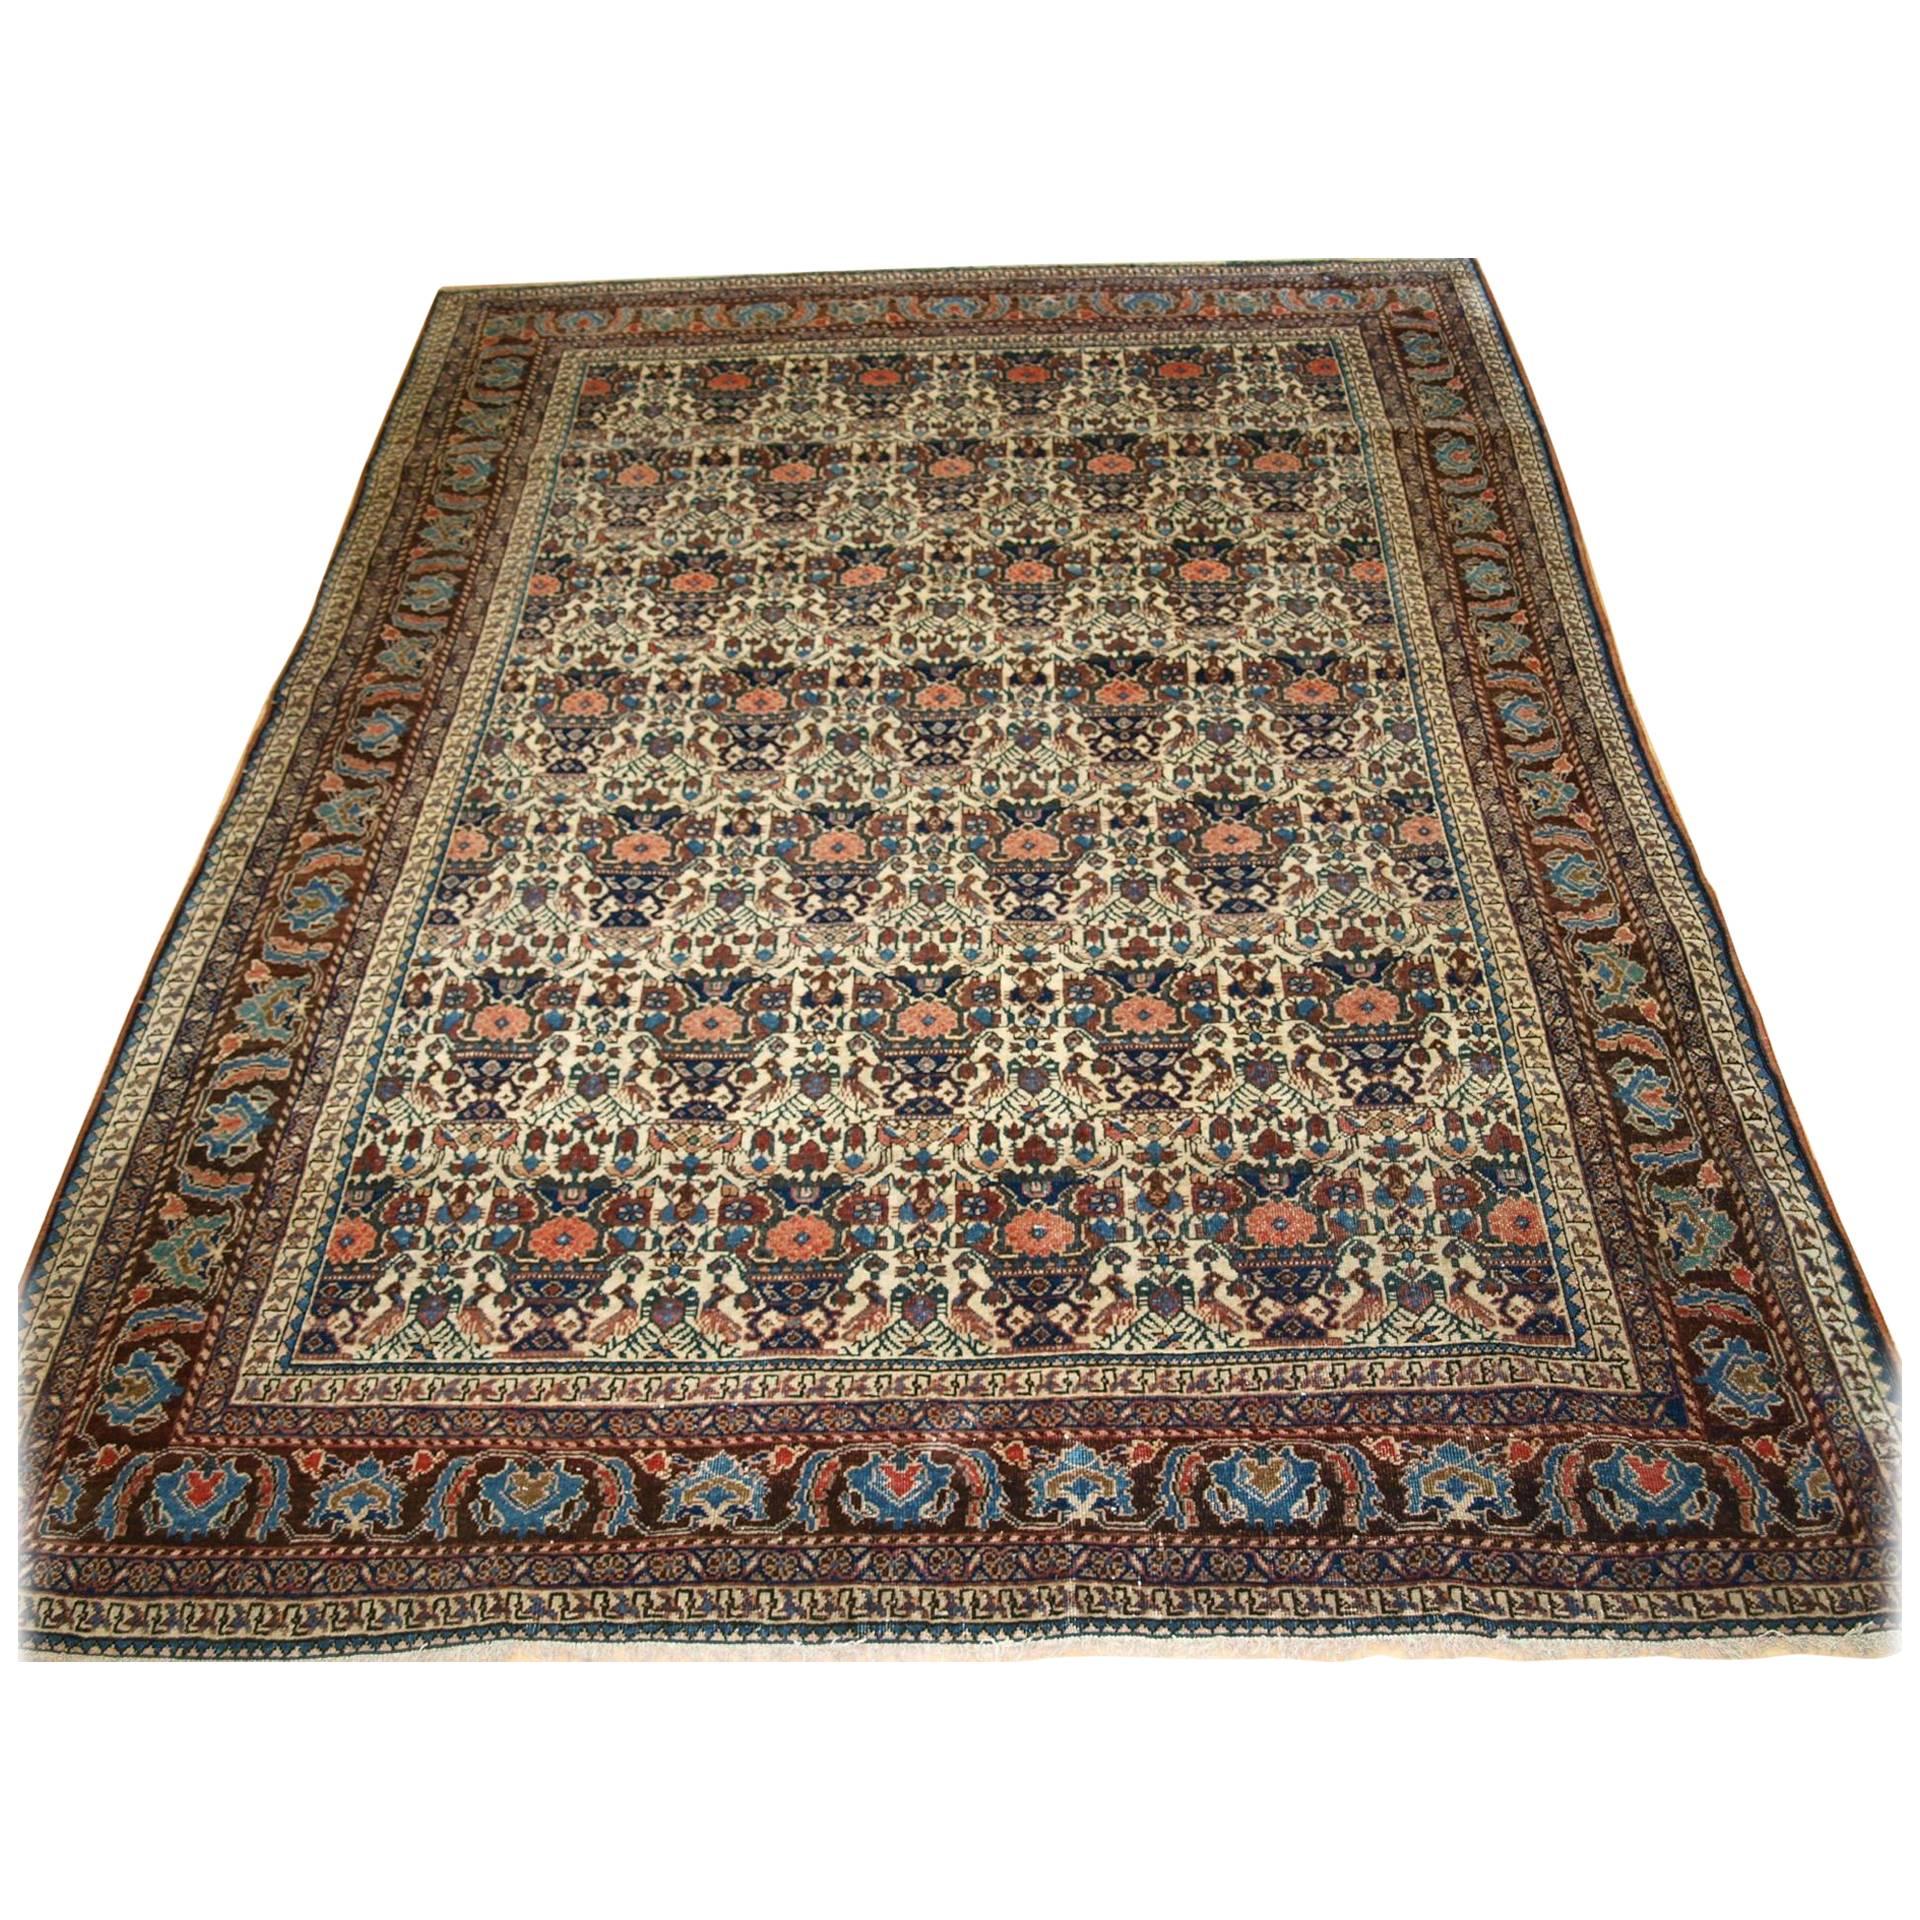 Antique Abedeh Rug with the Classic ‘Vase and Peacock’ Design, circa 1900-1920